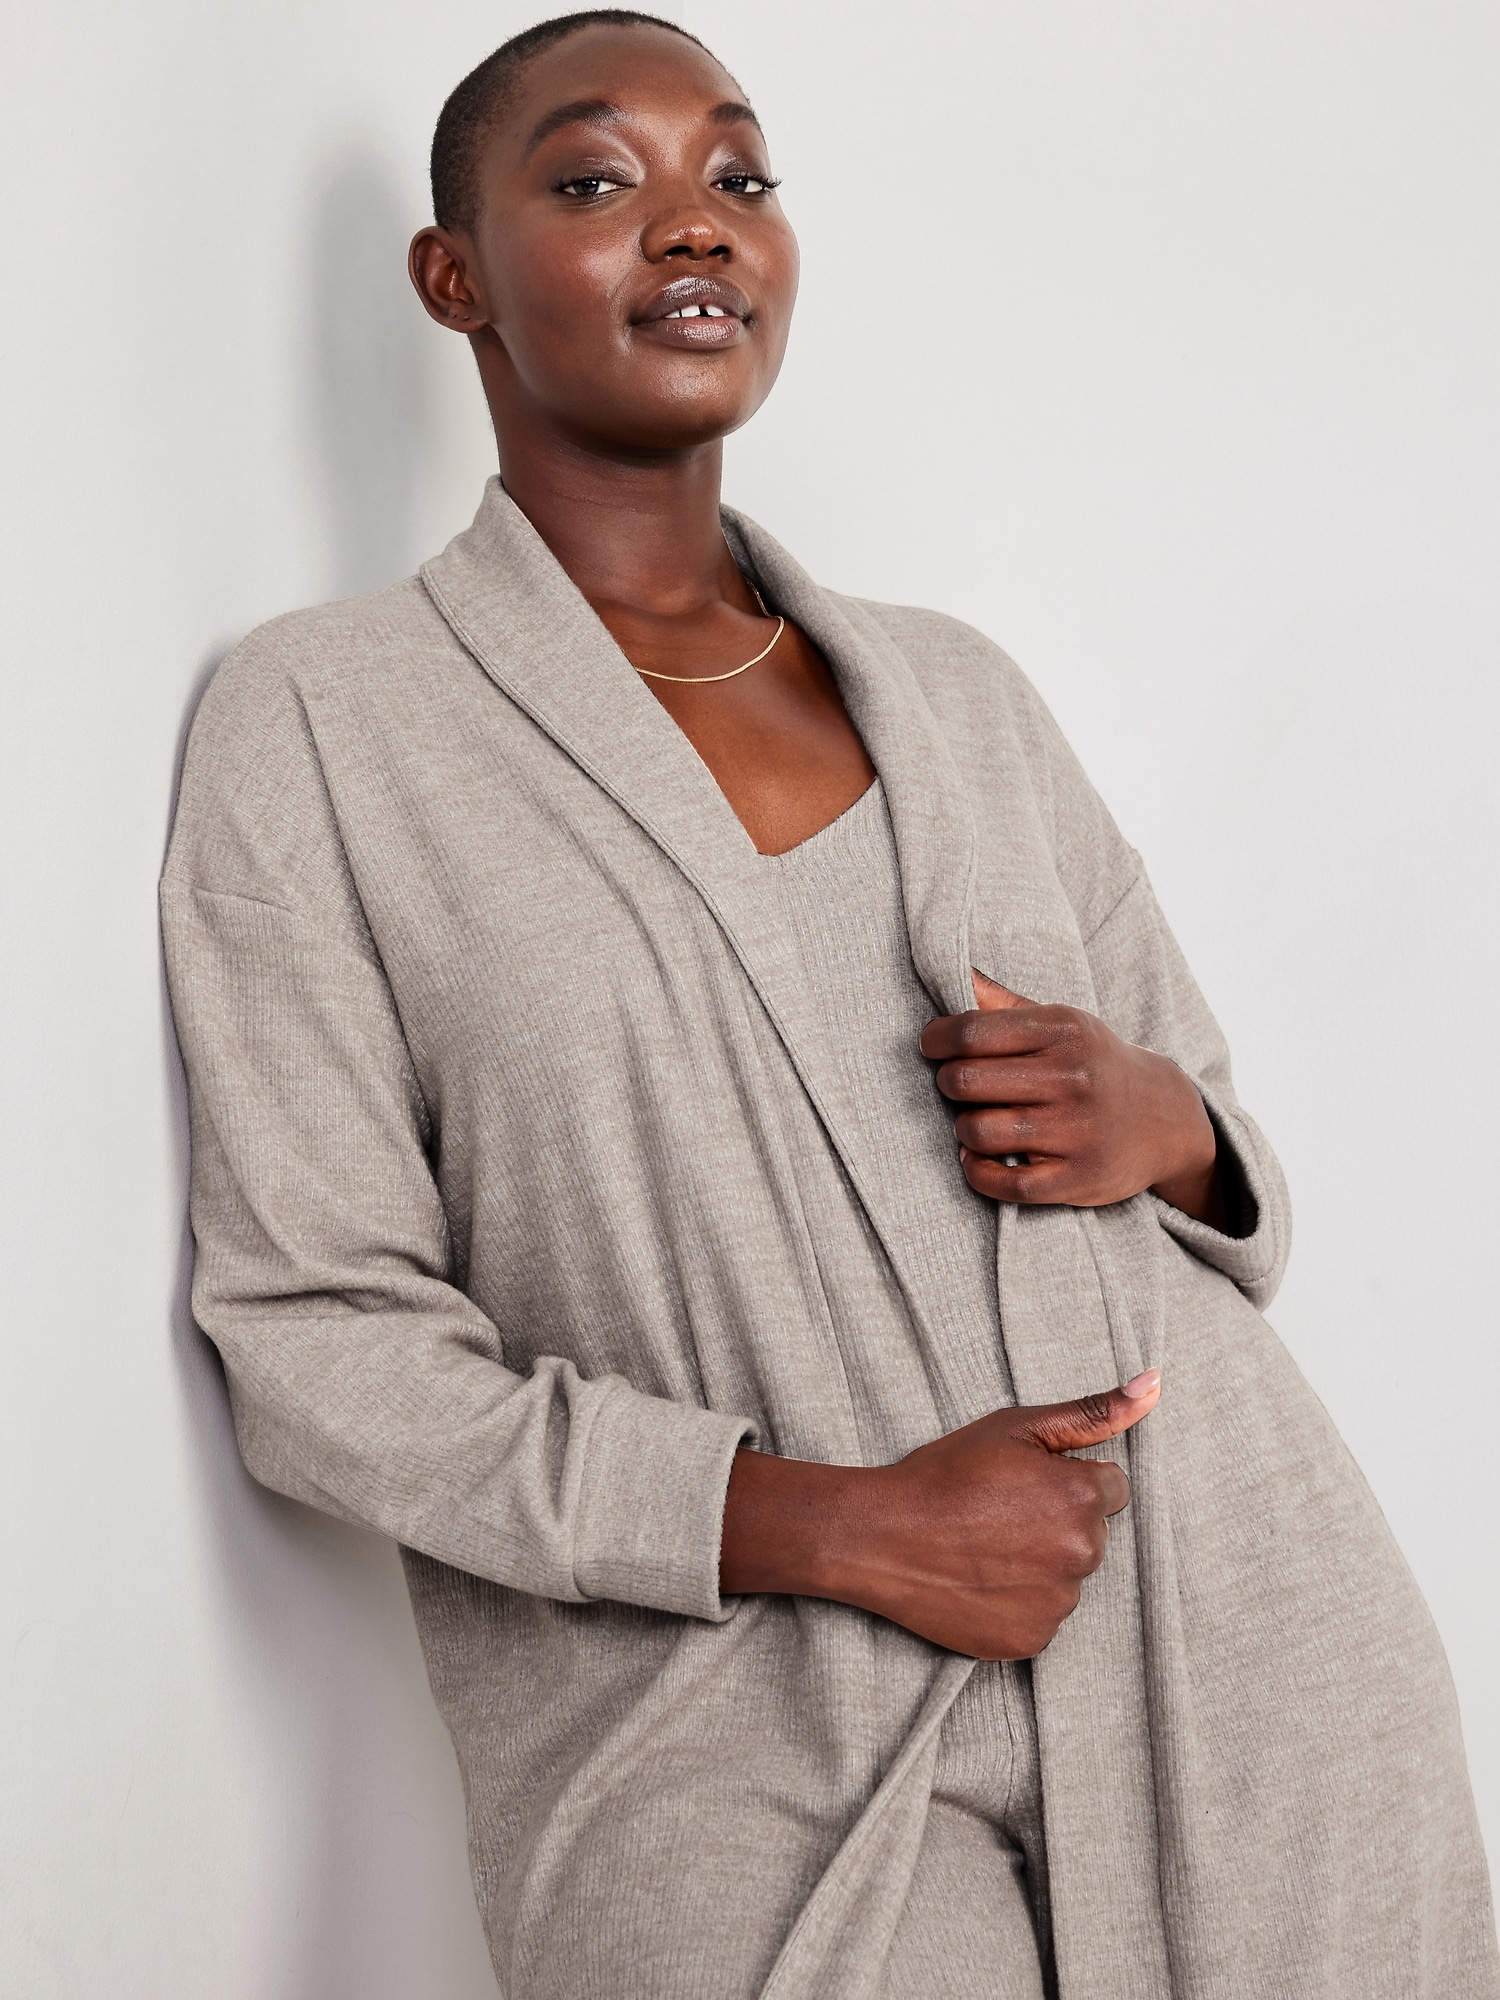 Oversized Sweater-Knit Robe | Old Navy